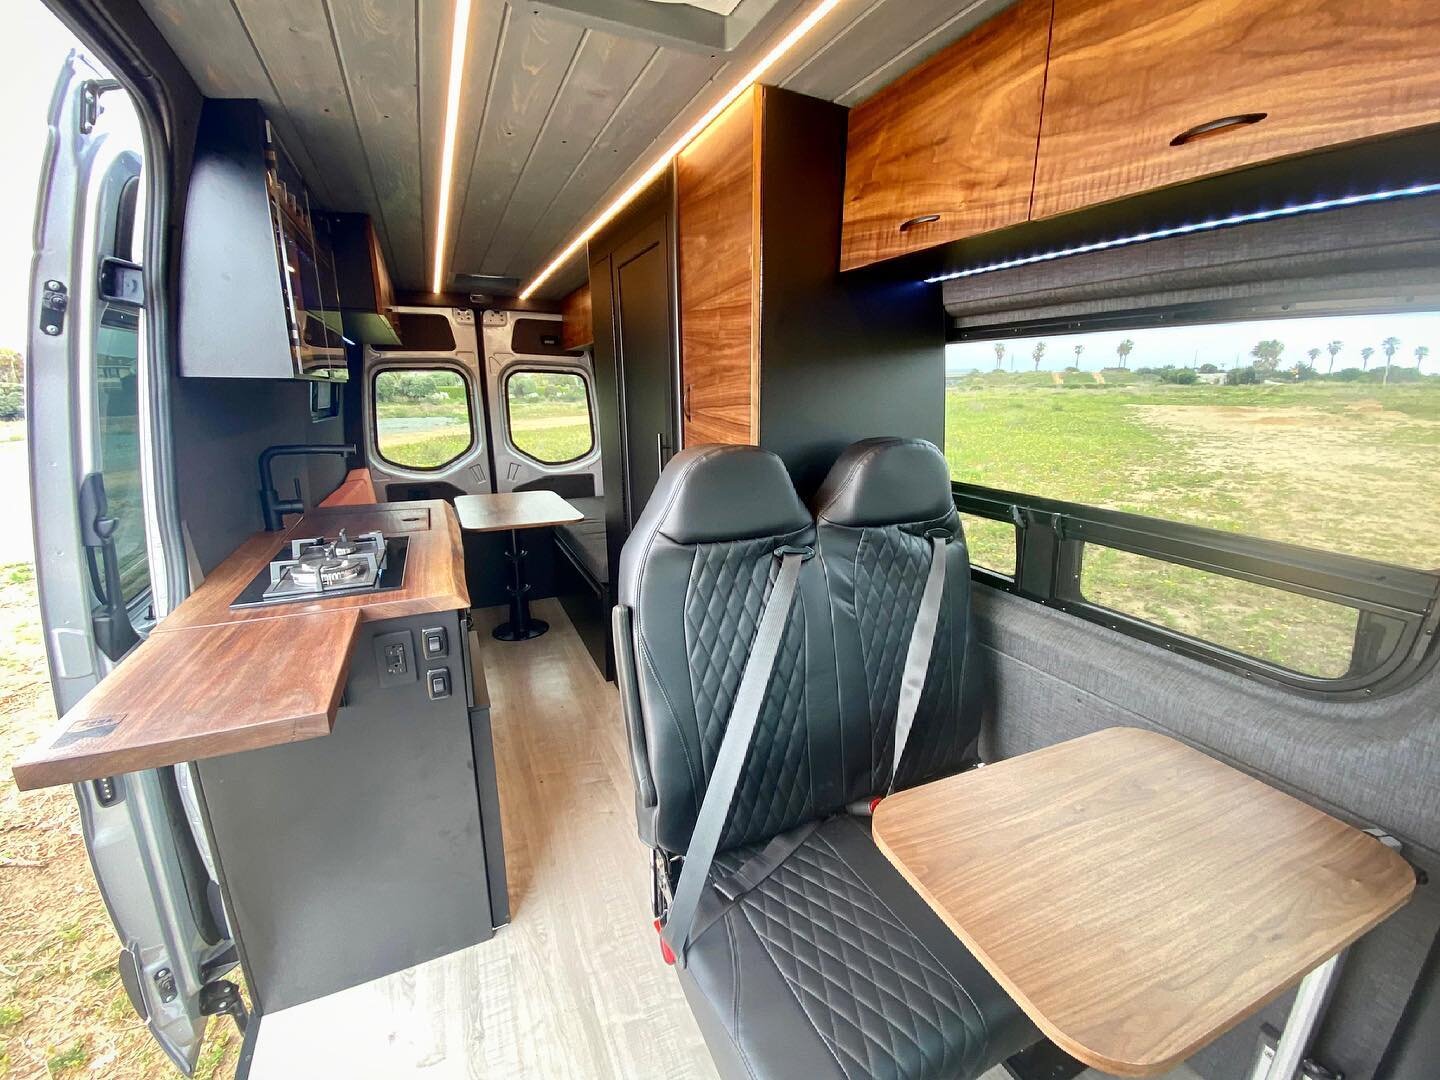 Designed with friends and family in mind, this van seats plenty and has its own cocktail bar to boot!